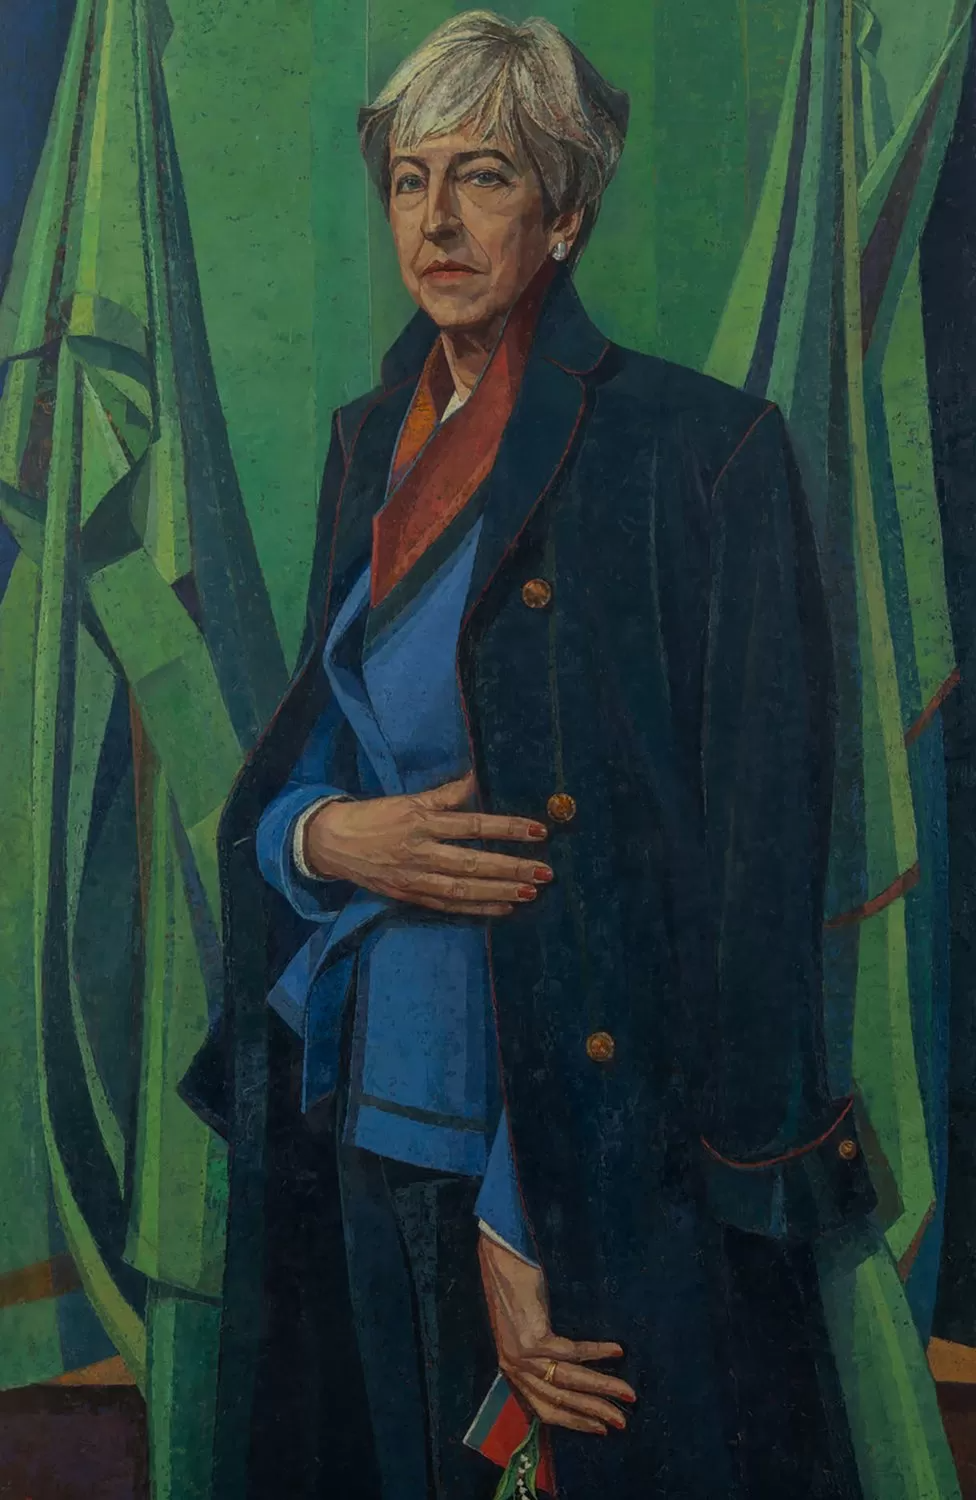 A portrait of Theresa in a dark coat, against a green backdrop, holding a lily of the valley.